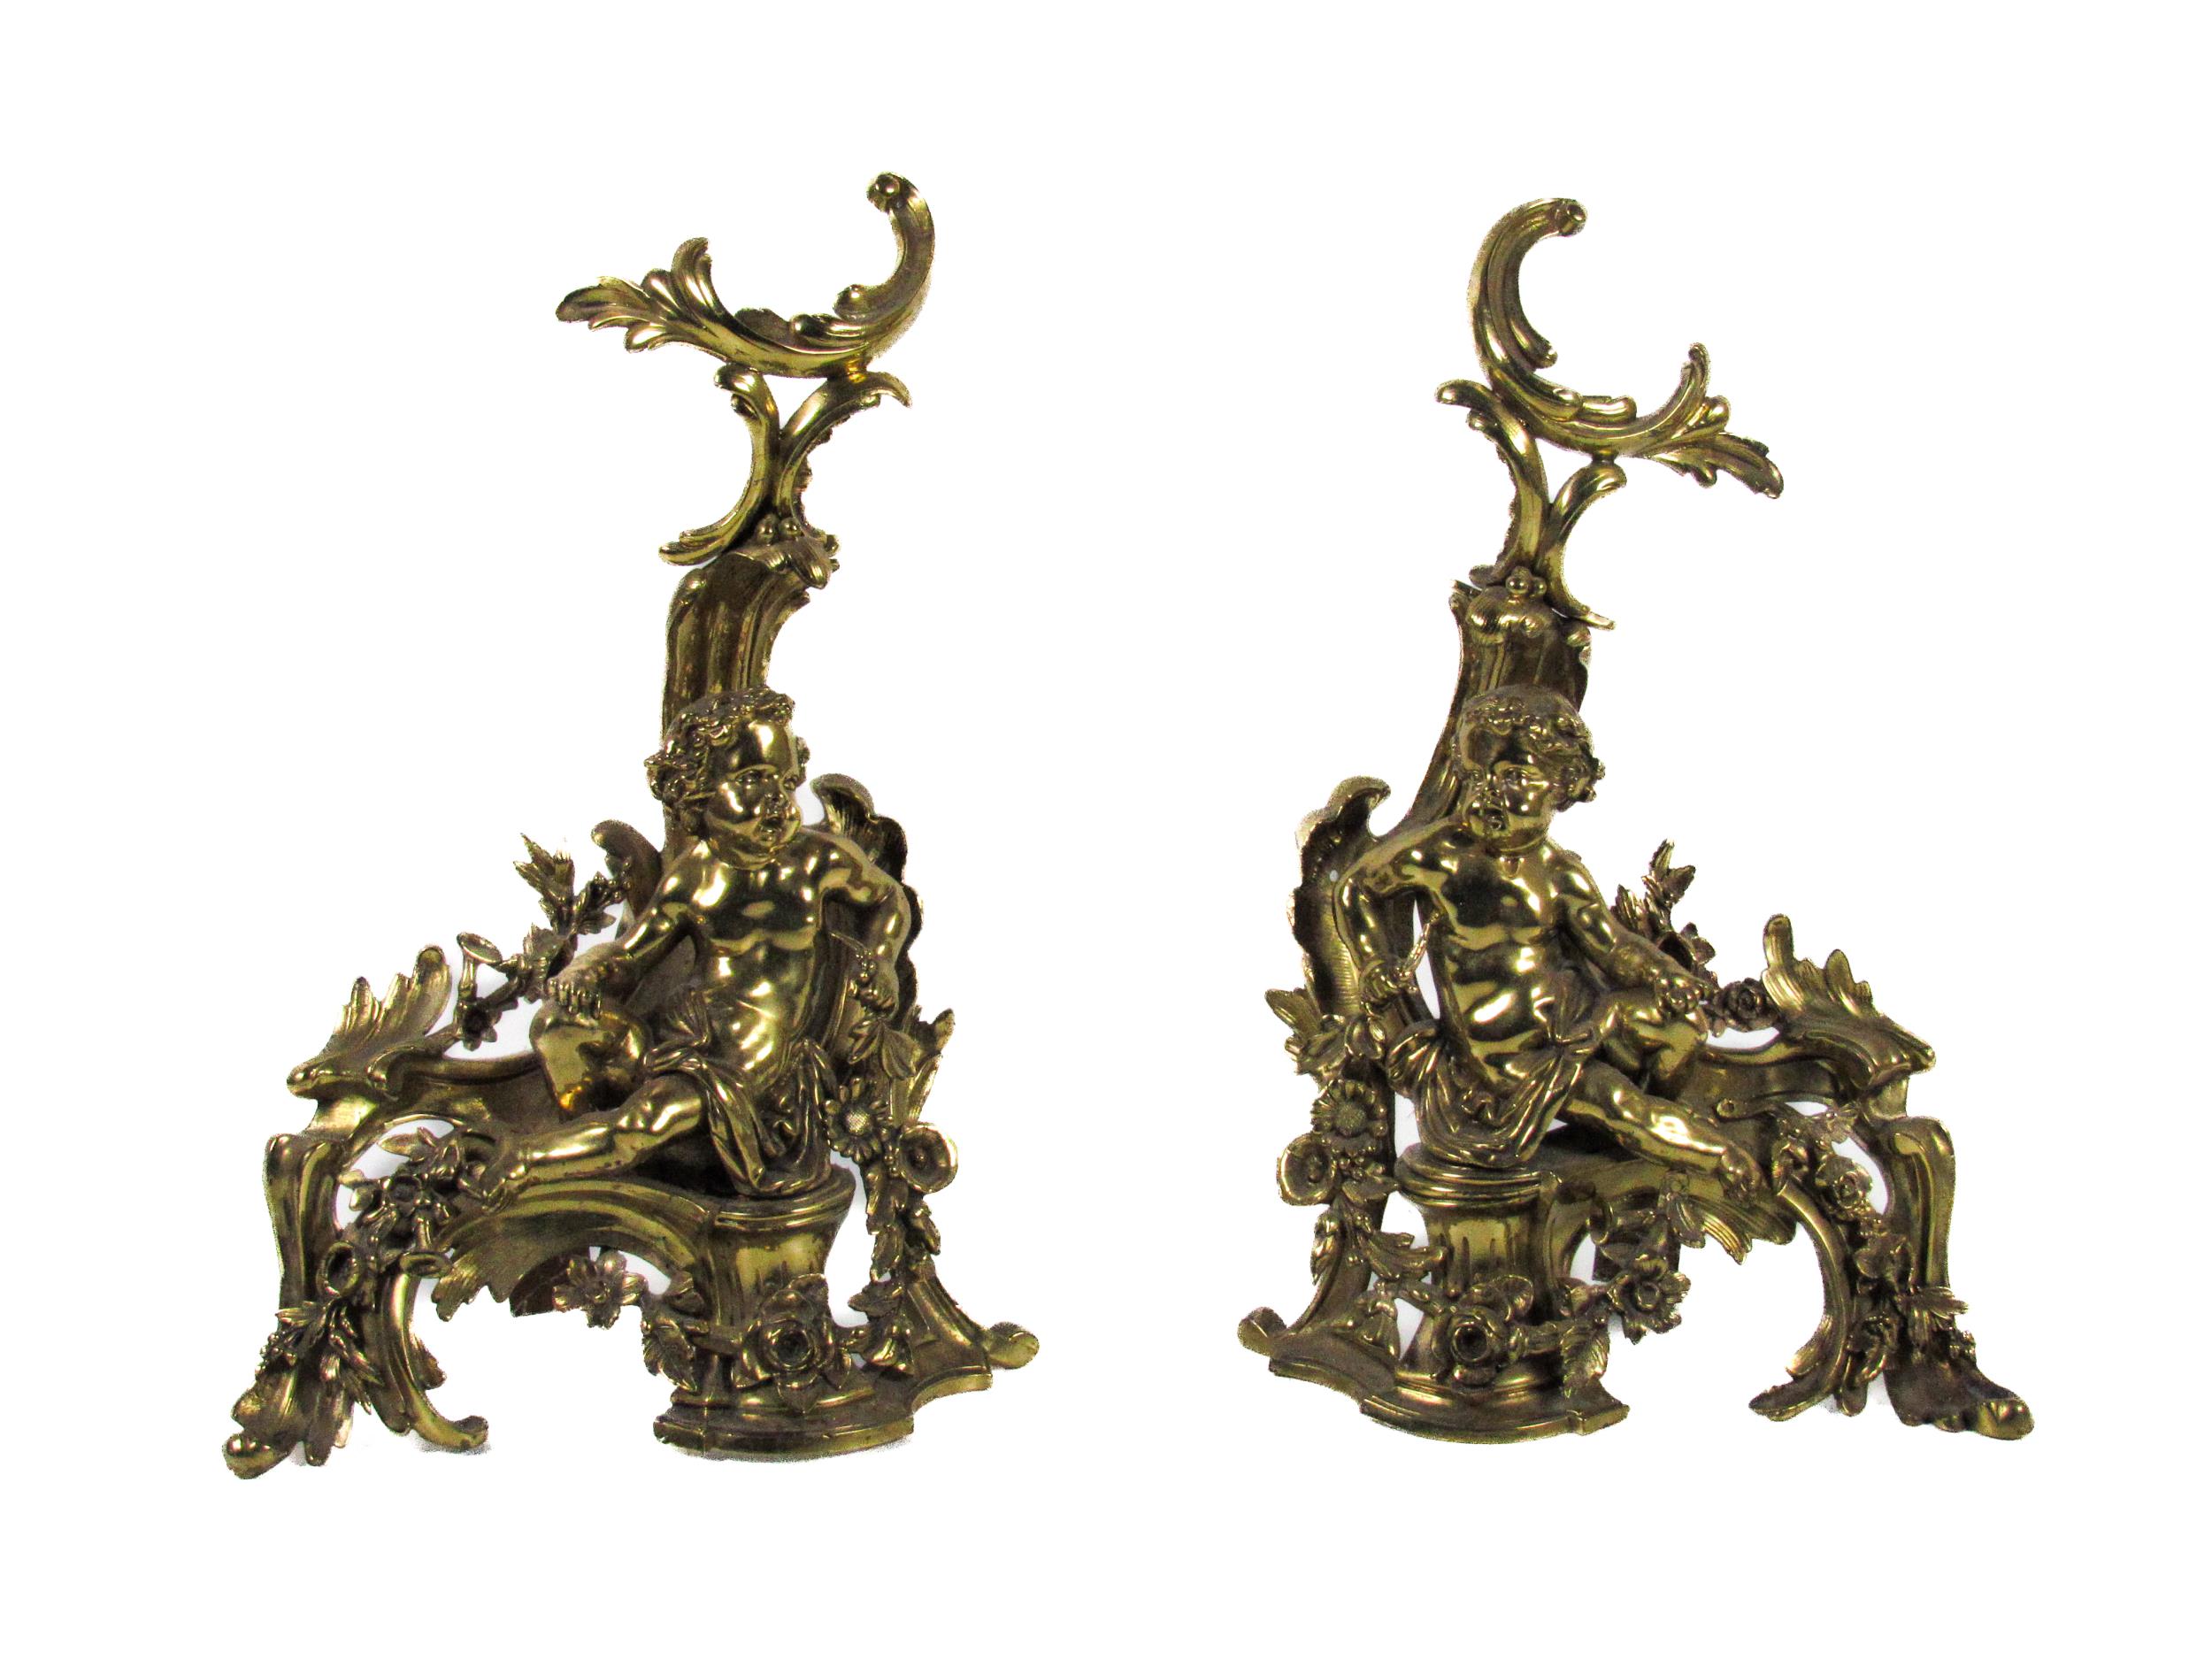 A pair of fine quality 19th Century French gilded brass Chevets, decorated in the rococo taste